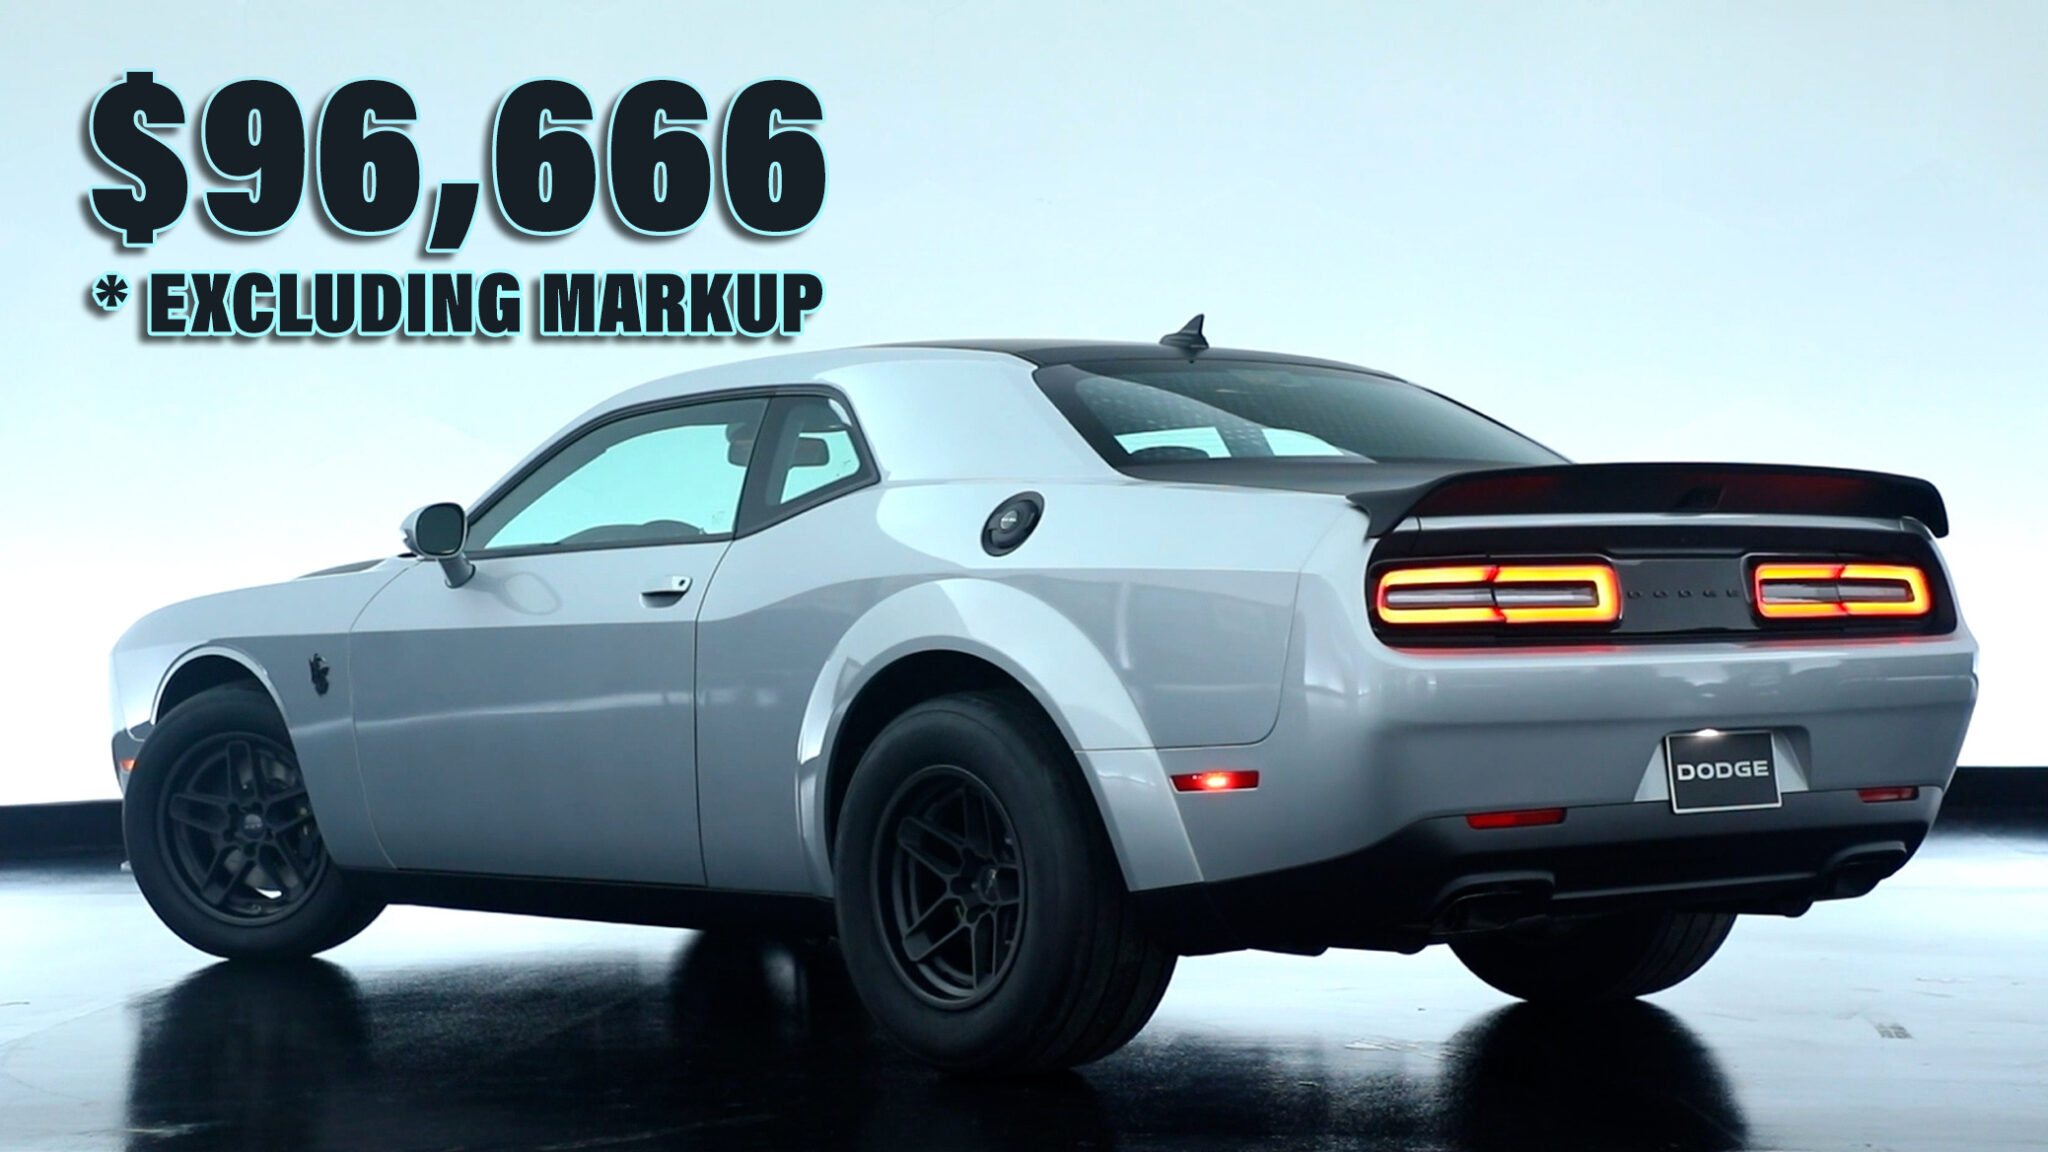 2023 Dodge Challenger SRT Demon 170 Orders Open March 27, Costs 96,666 And You Must Sign A